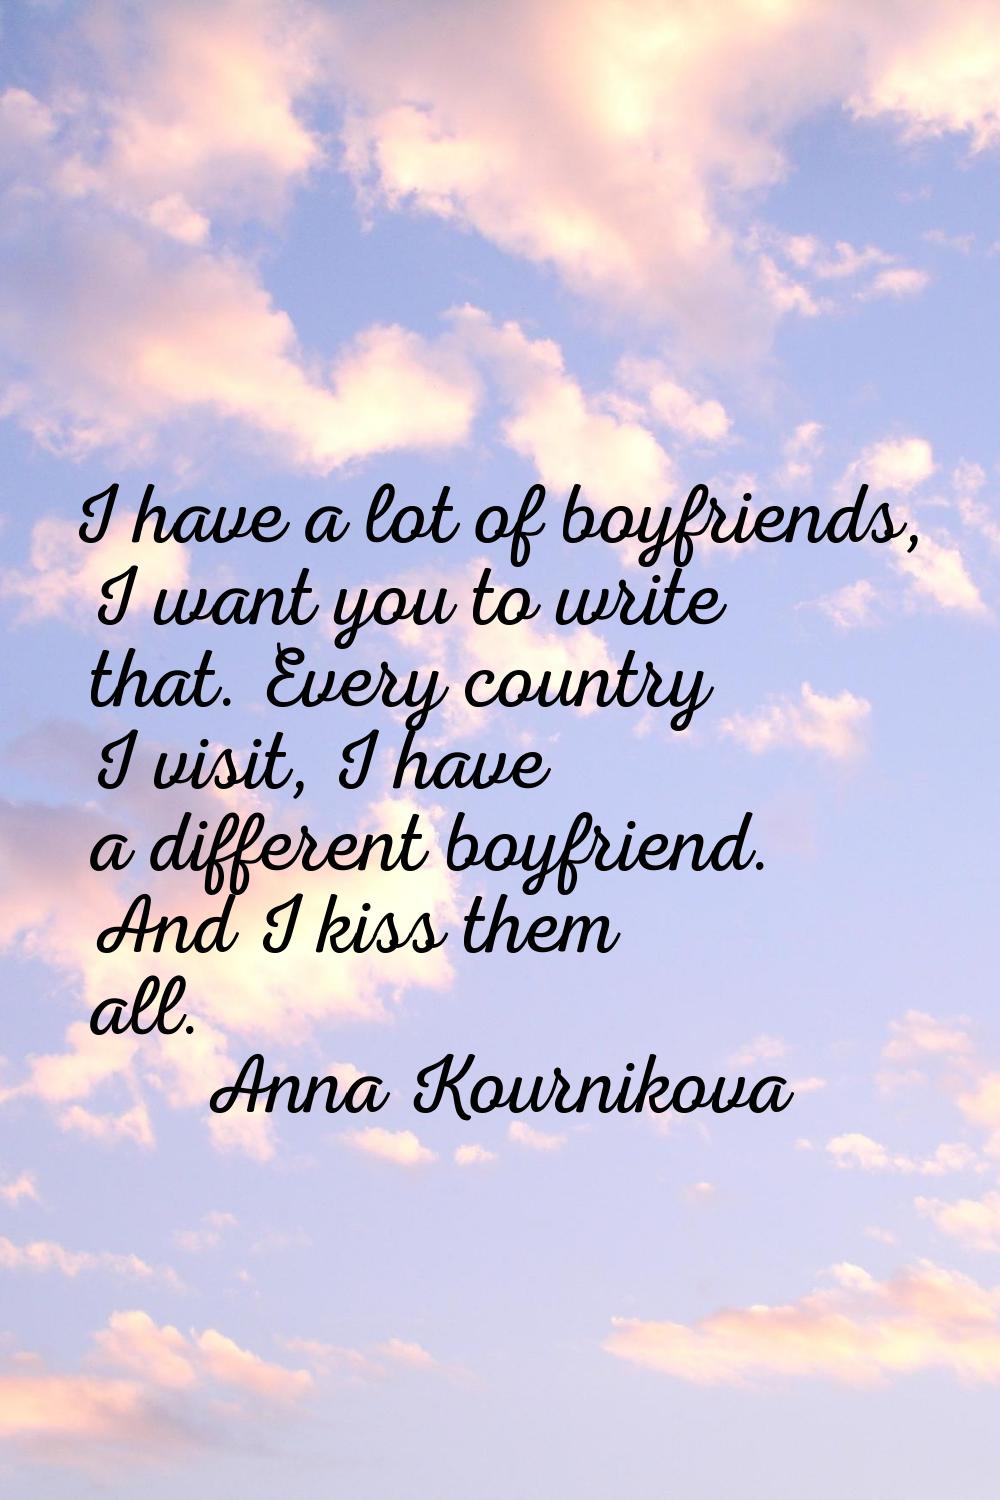 I have a lot of boyfriends, I want you to write that. Every country I visit, I have a different boy